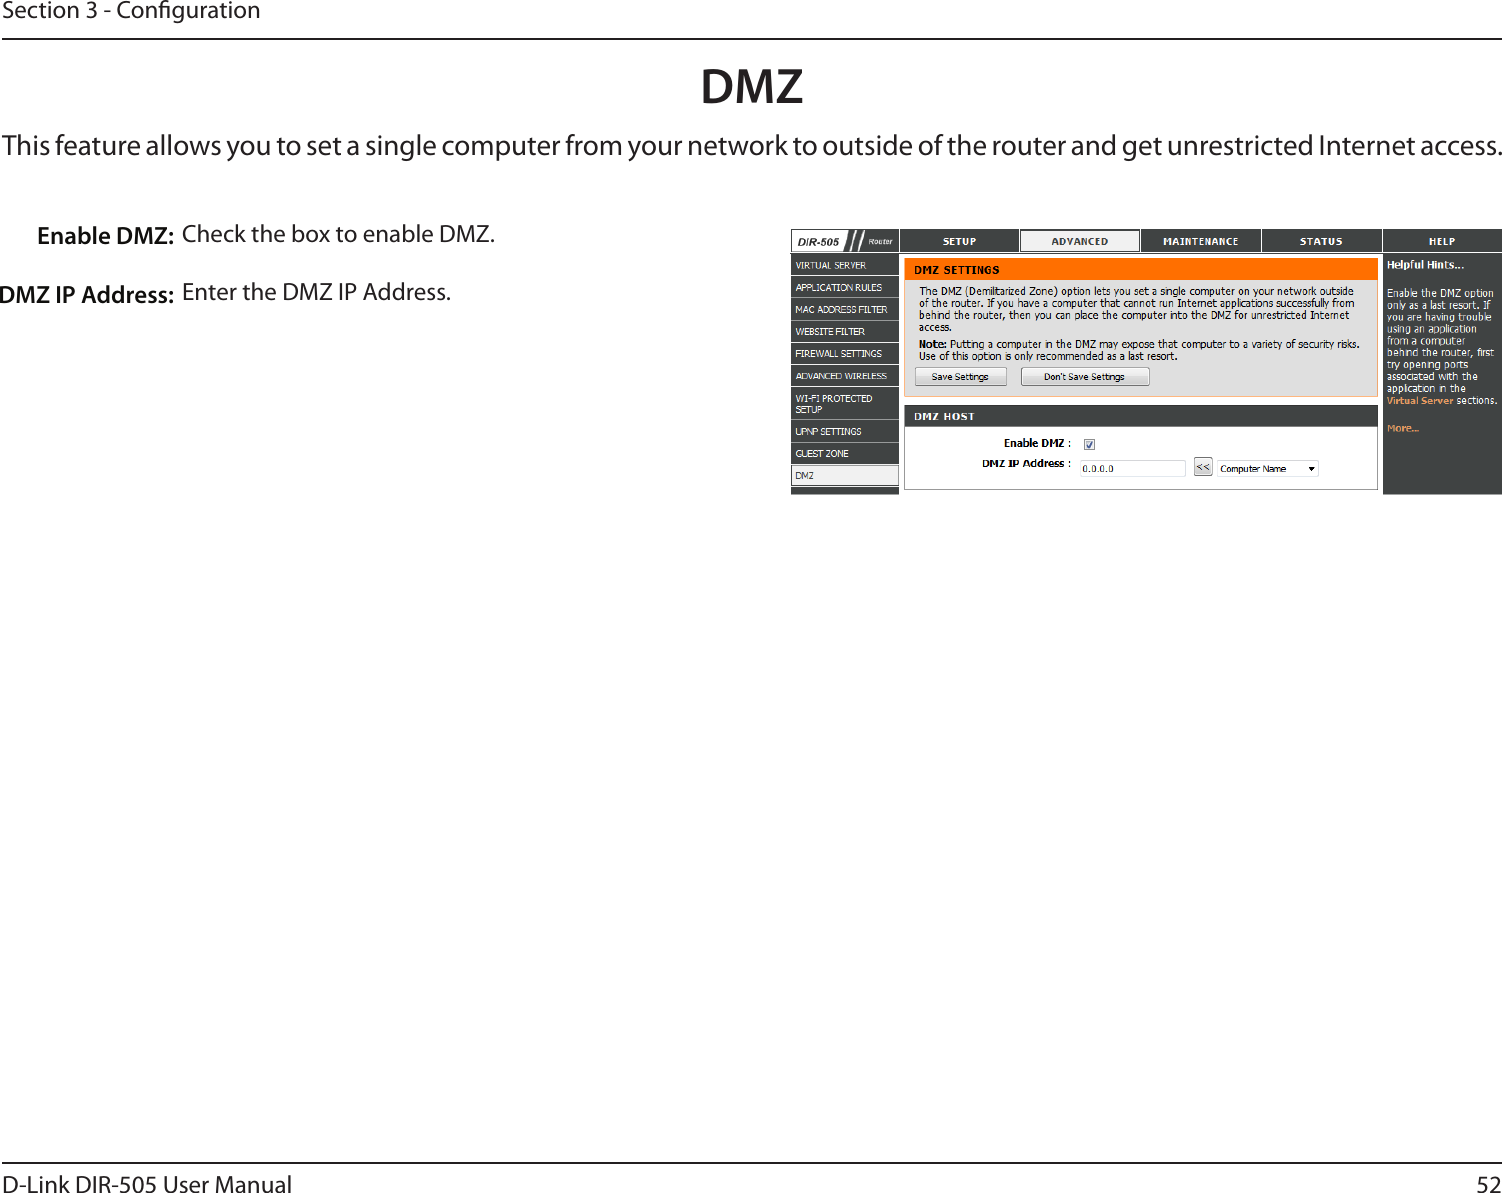 52D-Link DIR-505 User ManualSection 3 - CongurationDMZThis feature allows you to set a single computer from your network to outside of the router and get unrestricted Internet access. Check the box to enable DMZ.Enter the DMZ IP Address. Enable DMZ:DMZ IP Address: